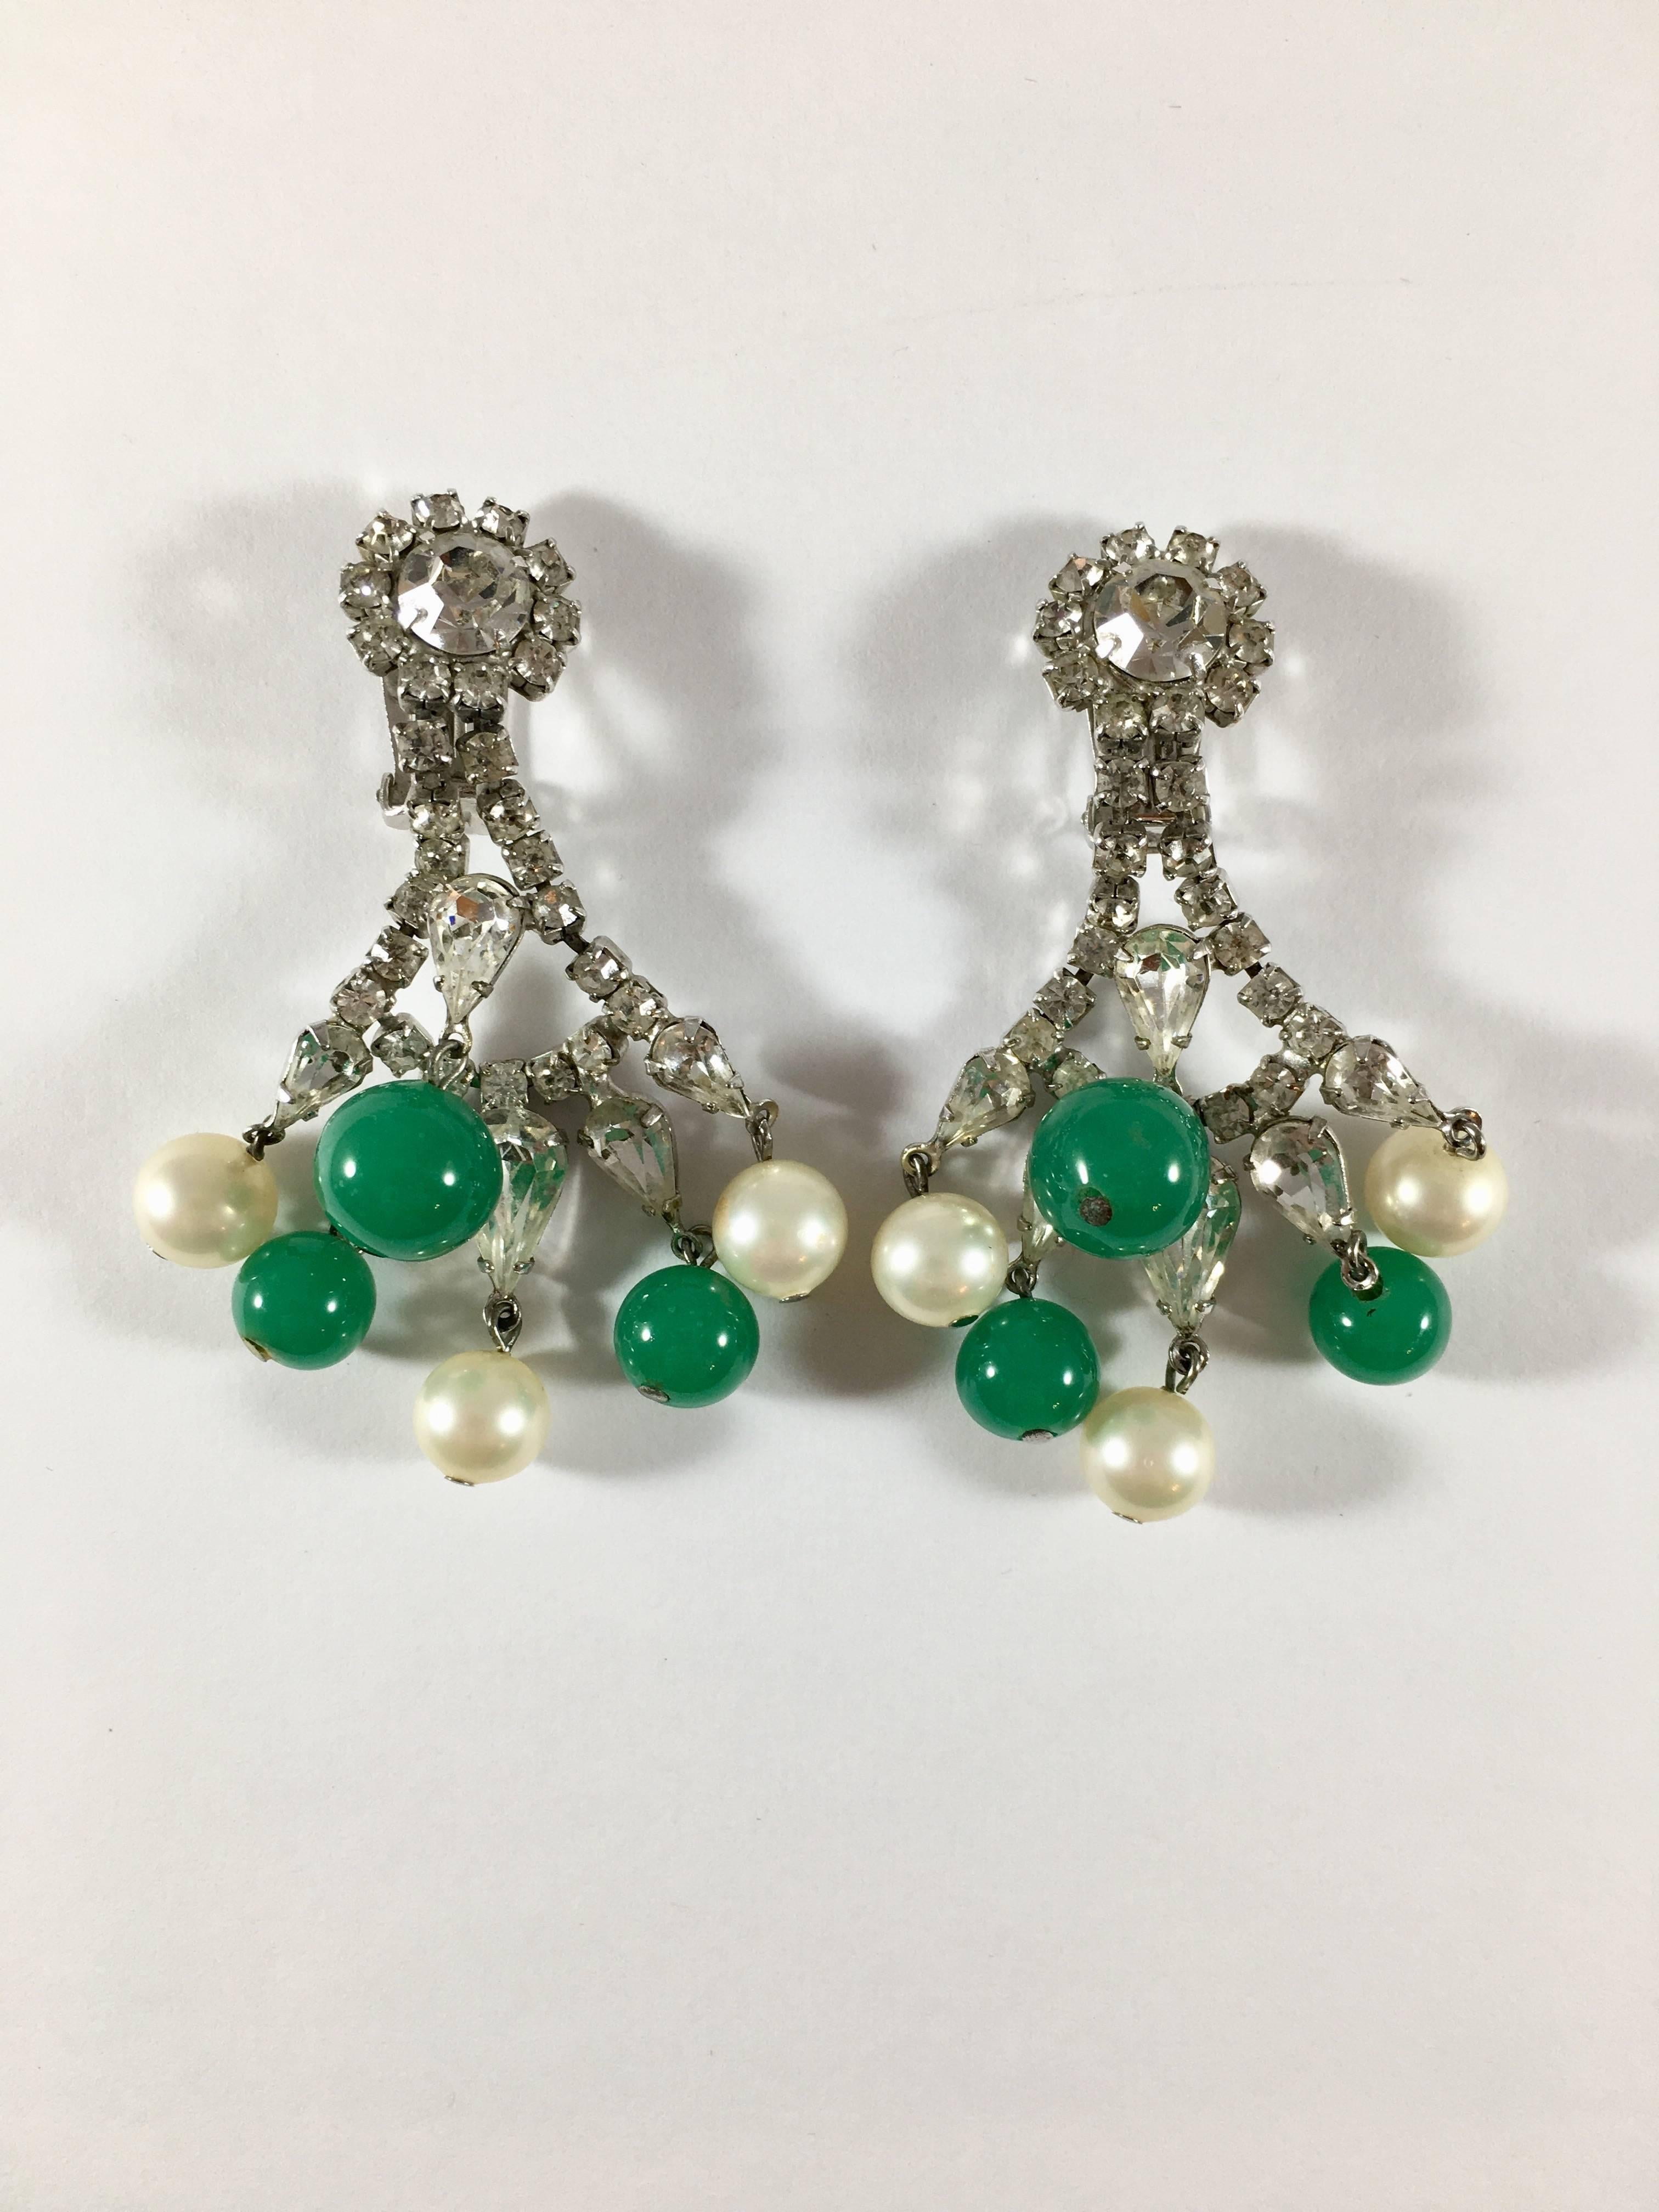 These beautiful 1960s chandelier dangle earrings from Hattie Carnegie are perfect for the holidays. Sparkly and festive, they feature clear rhinestones, faux pearls and emerald green colored glass balls. They are clip-ons and are marked CARNEGIE on